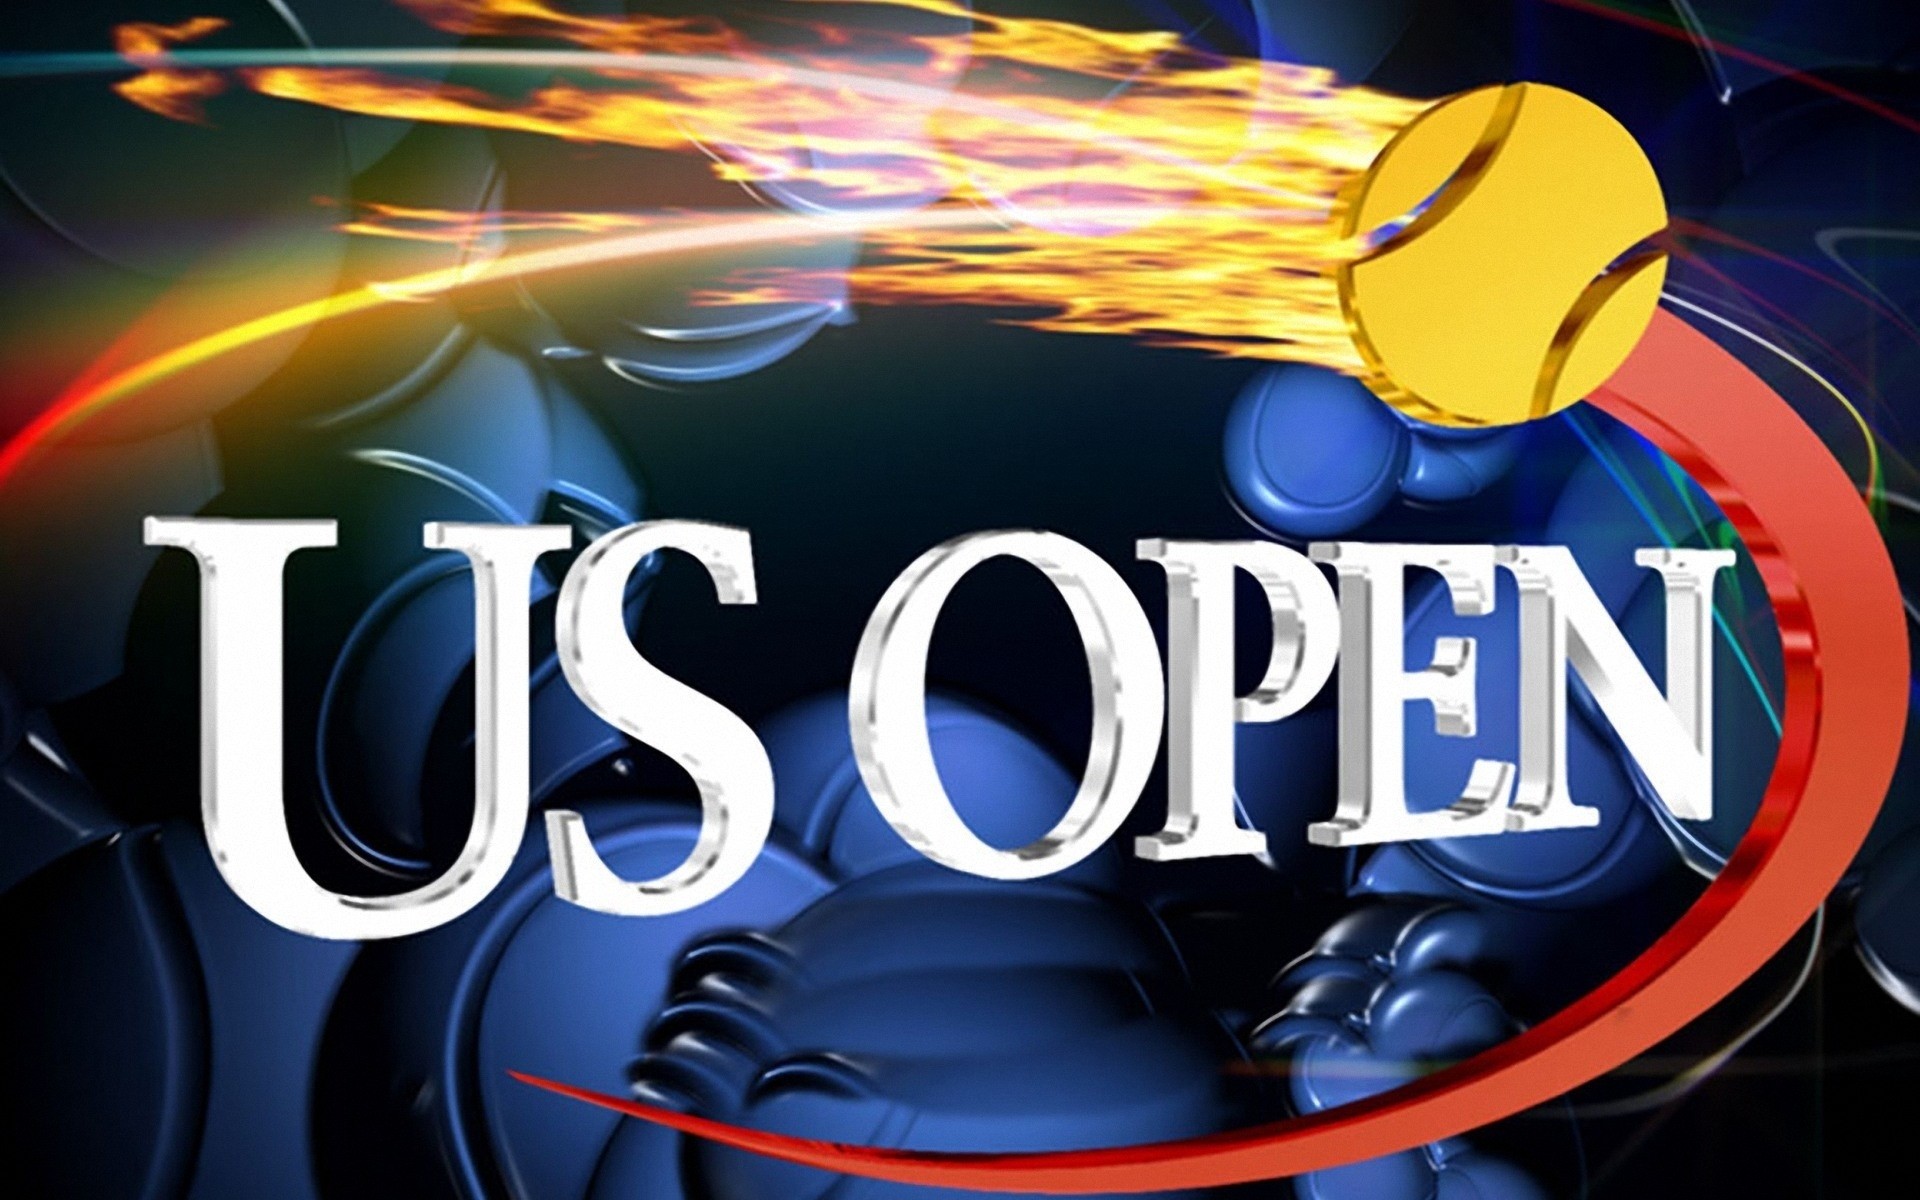 US Open Tennis Championship Tickets | Shop for US Open Tennis